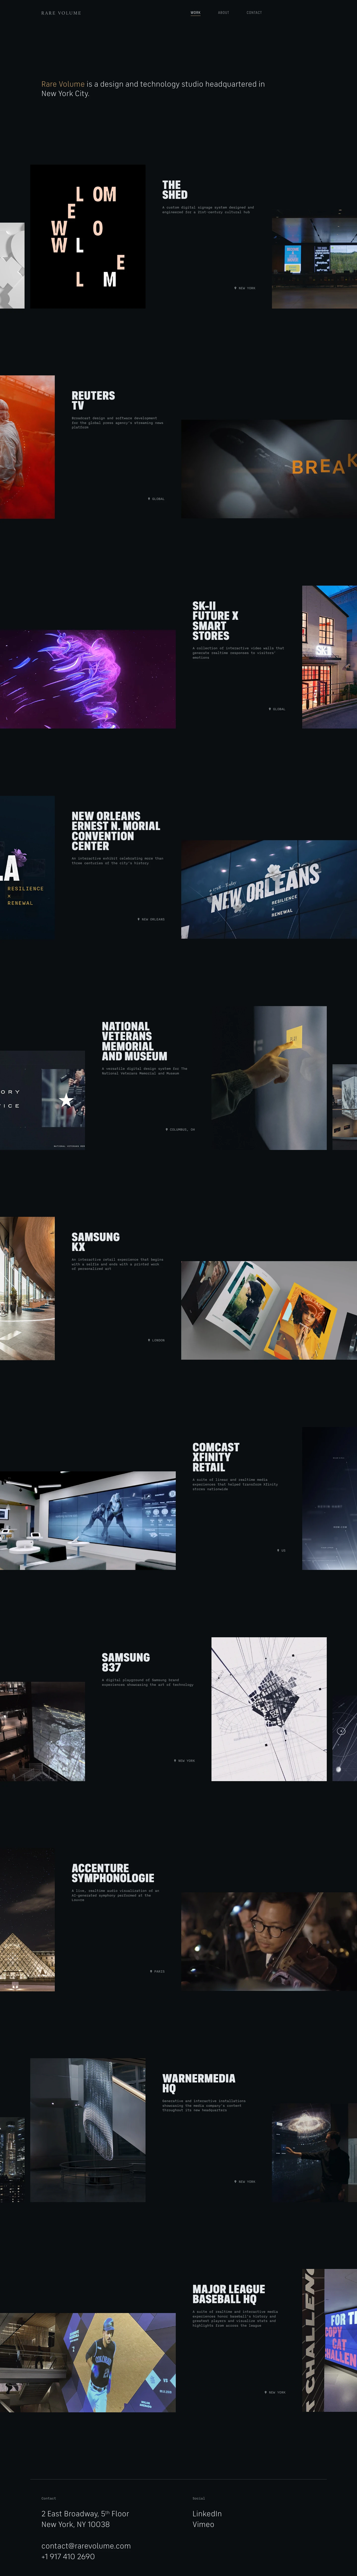 Rare Volume Landing Page Example: We are a design and technology studio that brings to life environments, events, and digital platforms.